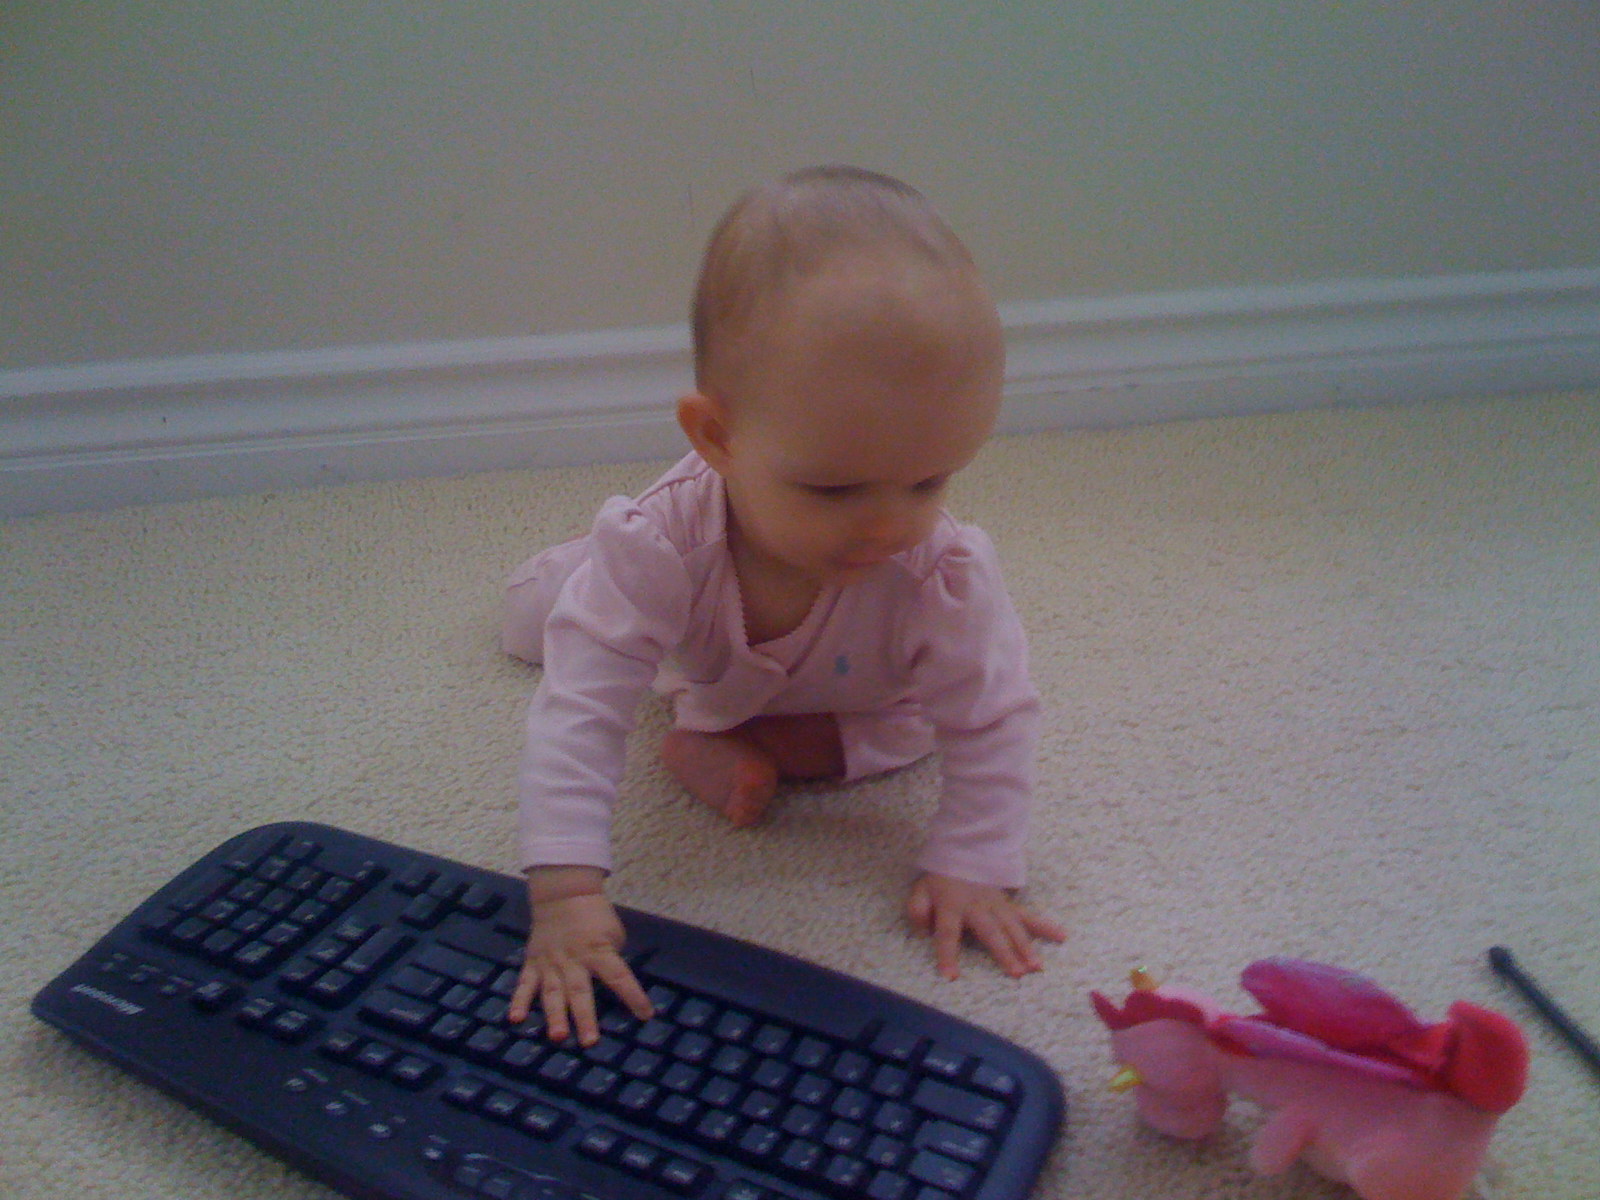 a baby is playing with the blue keyboard